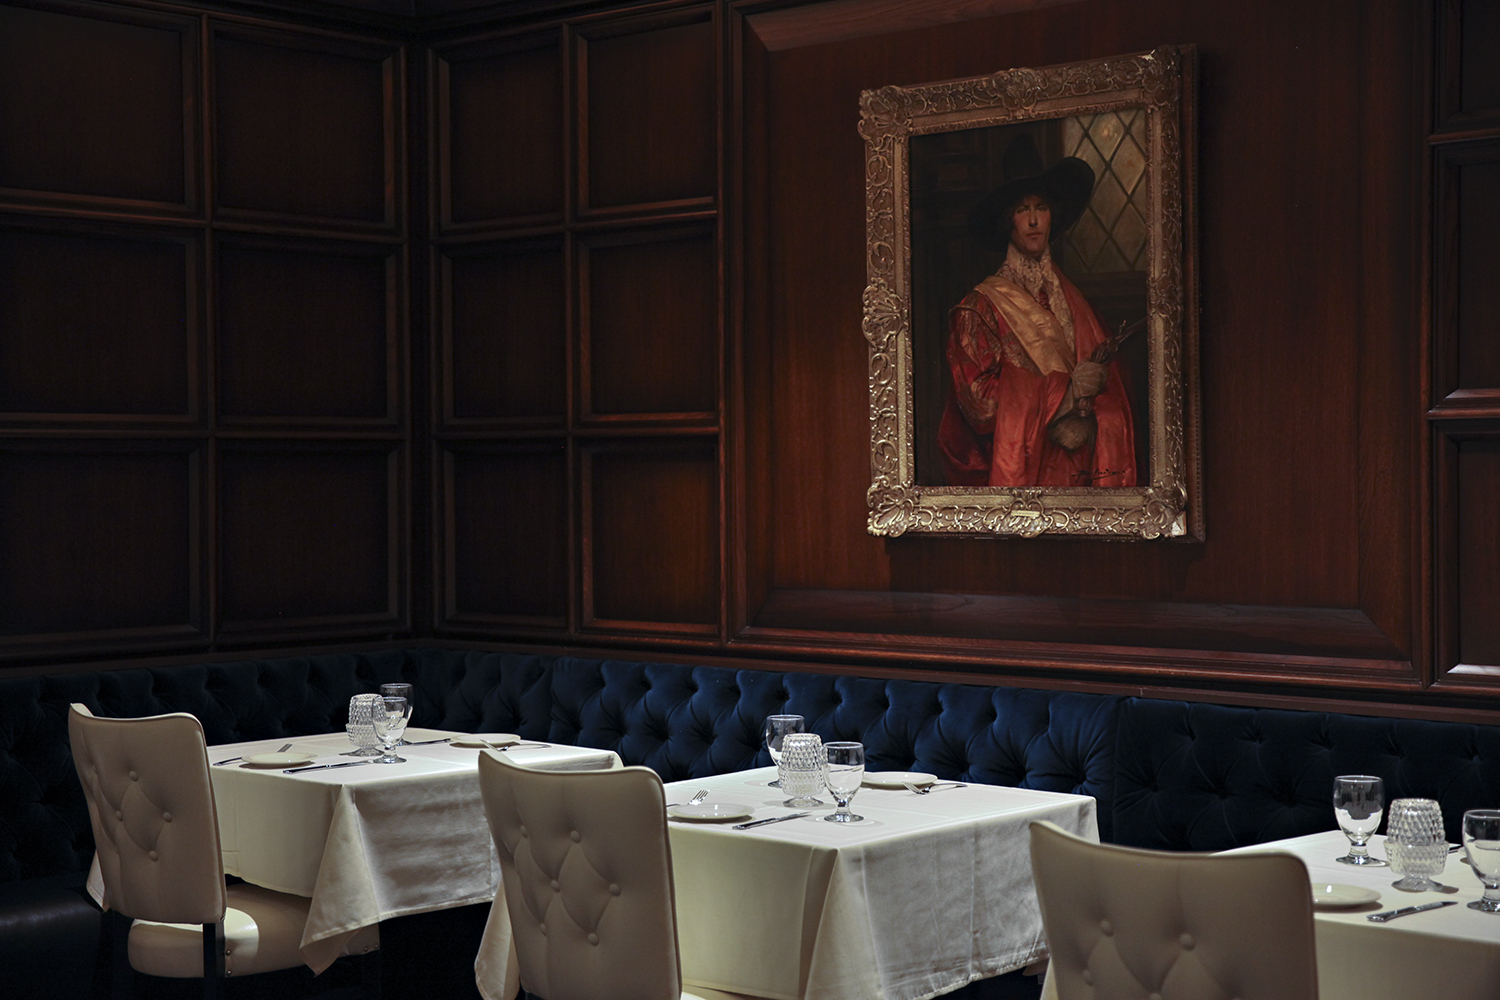 A line of white tablecloth tables in front of an oil painting of a regal looking guy